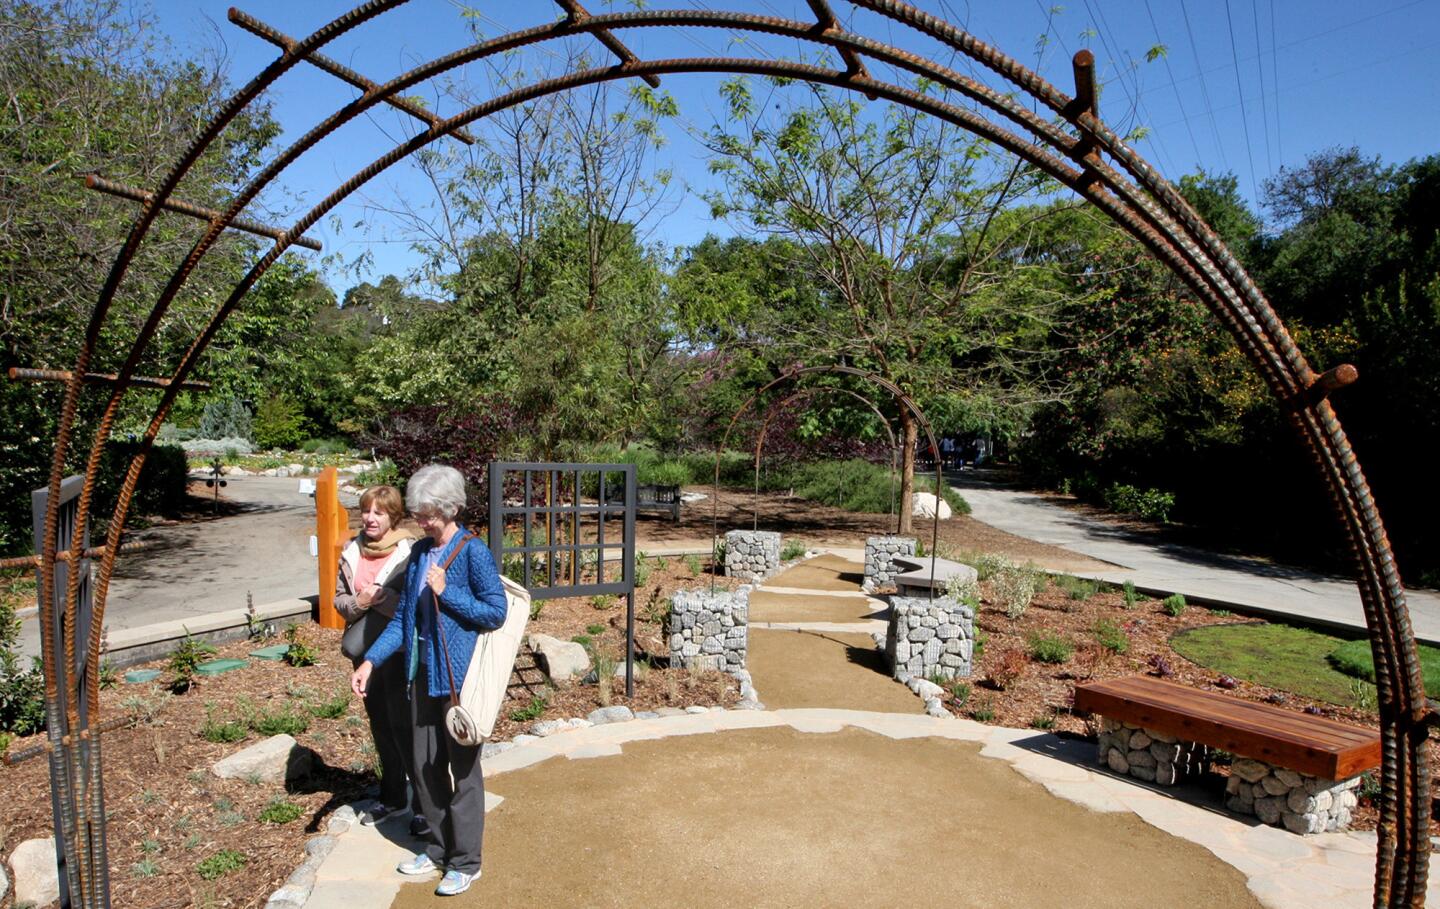 La Cañada Flintridge residents Kathryn Hill and Judy Trumbo take a look at Descanso Gardens' "low-water," demonstration garden during a press preview on Wednesday, April 8, 2015.